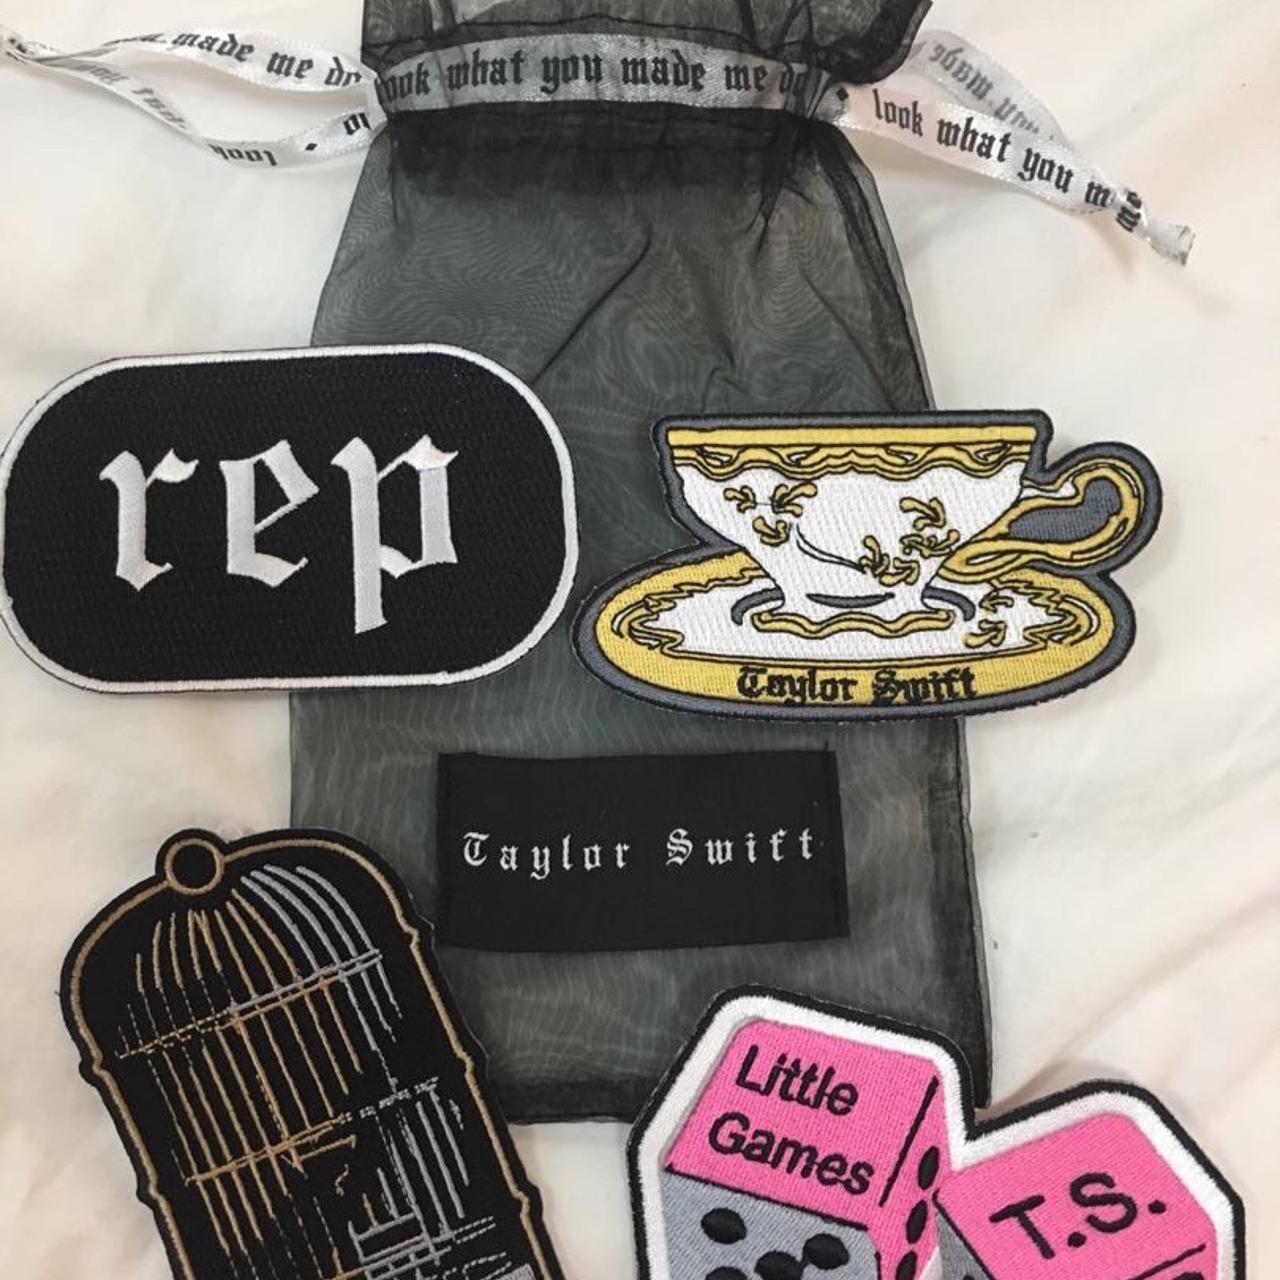 ISO!! I'm search of these Taylor Swift patches & - Depop